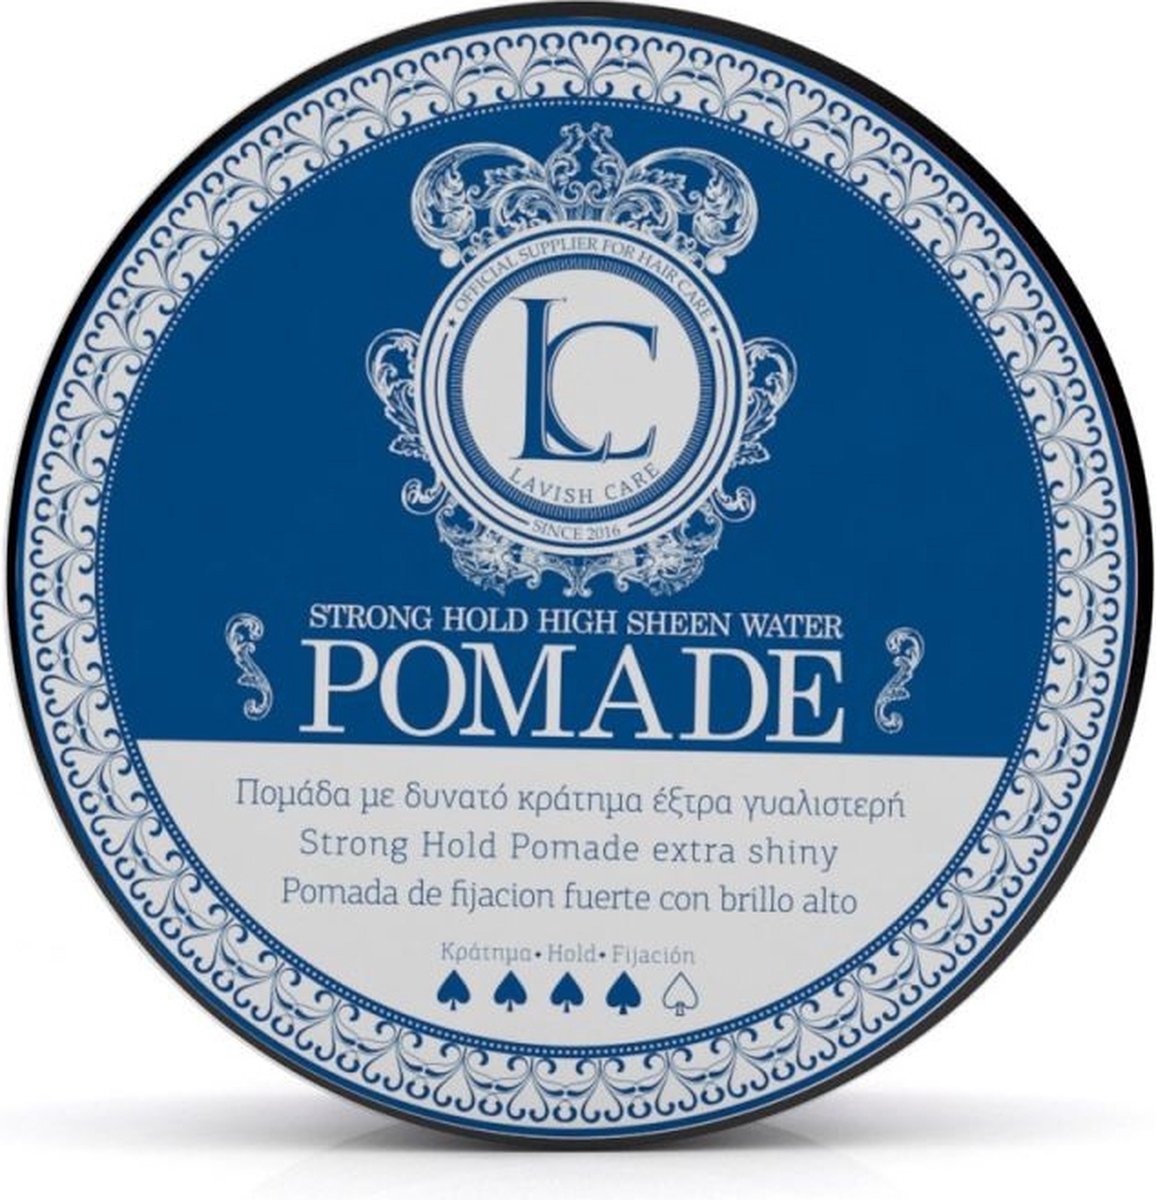 Lavish Care - Strong Hold High Sheen Water Pomade - Hairmade